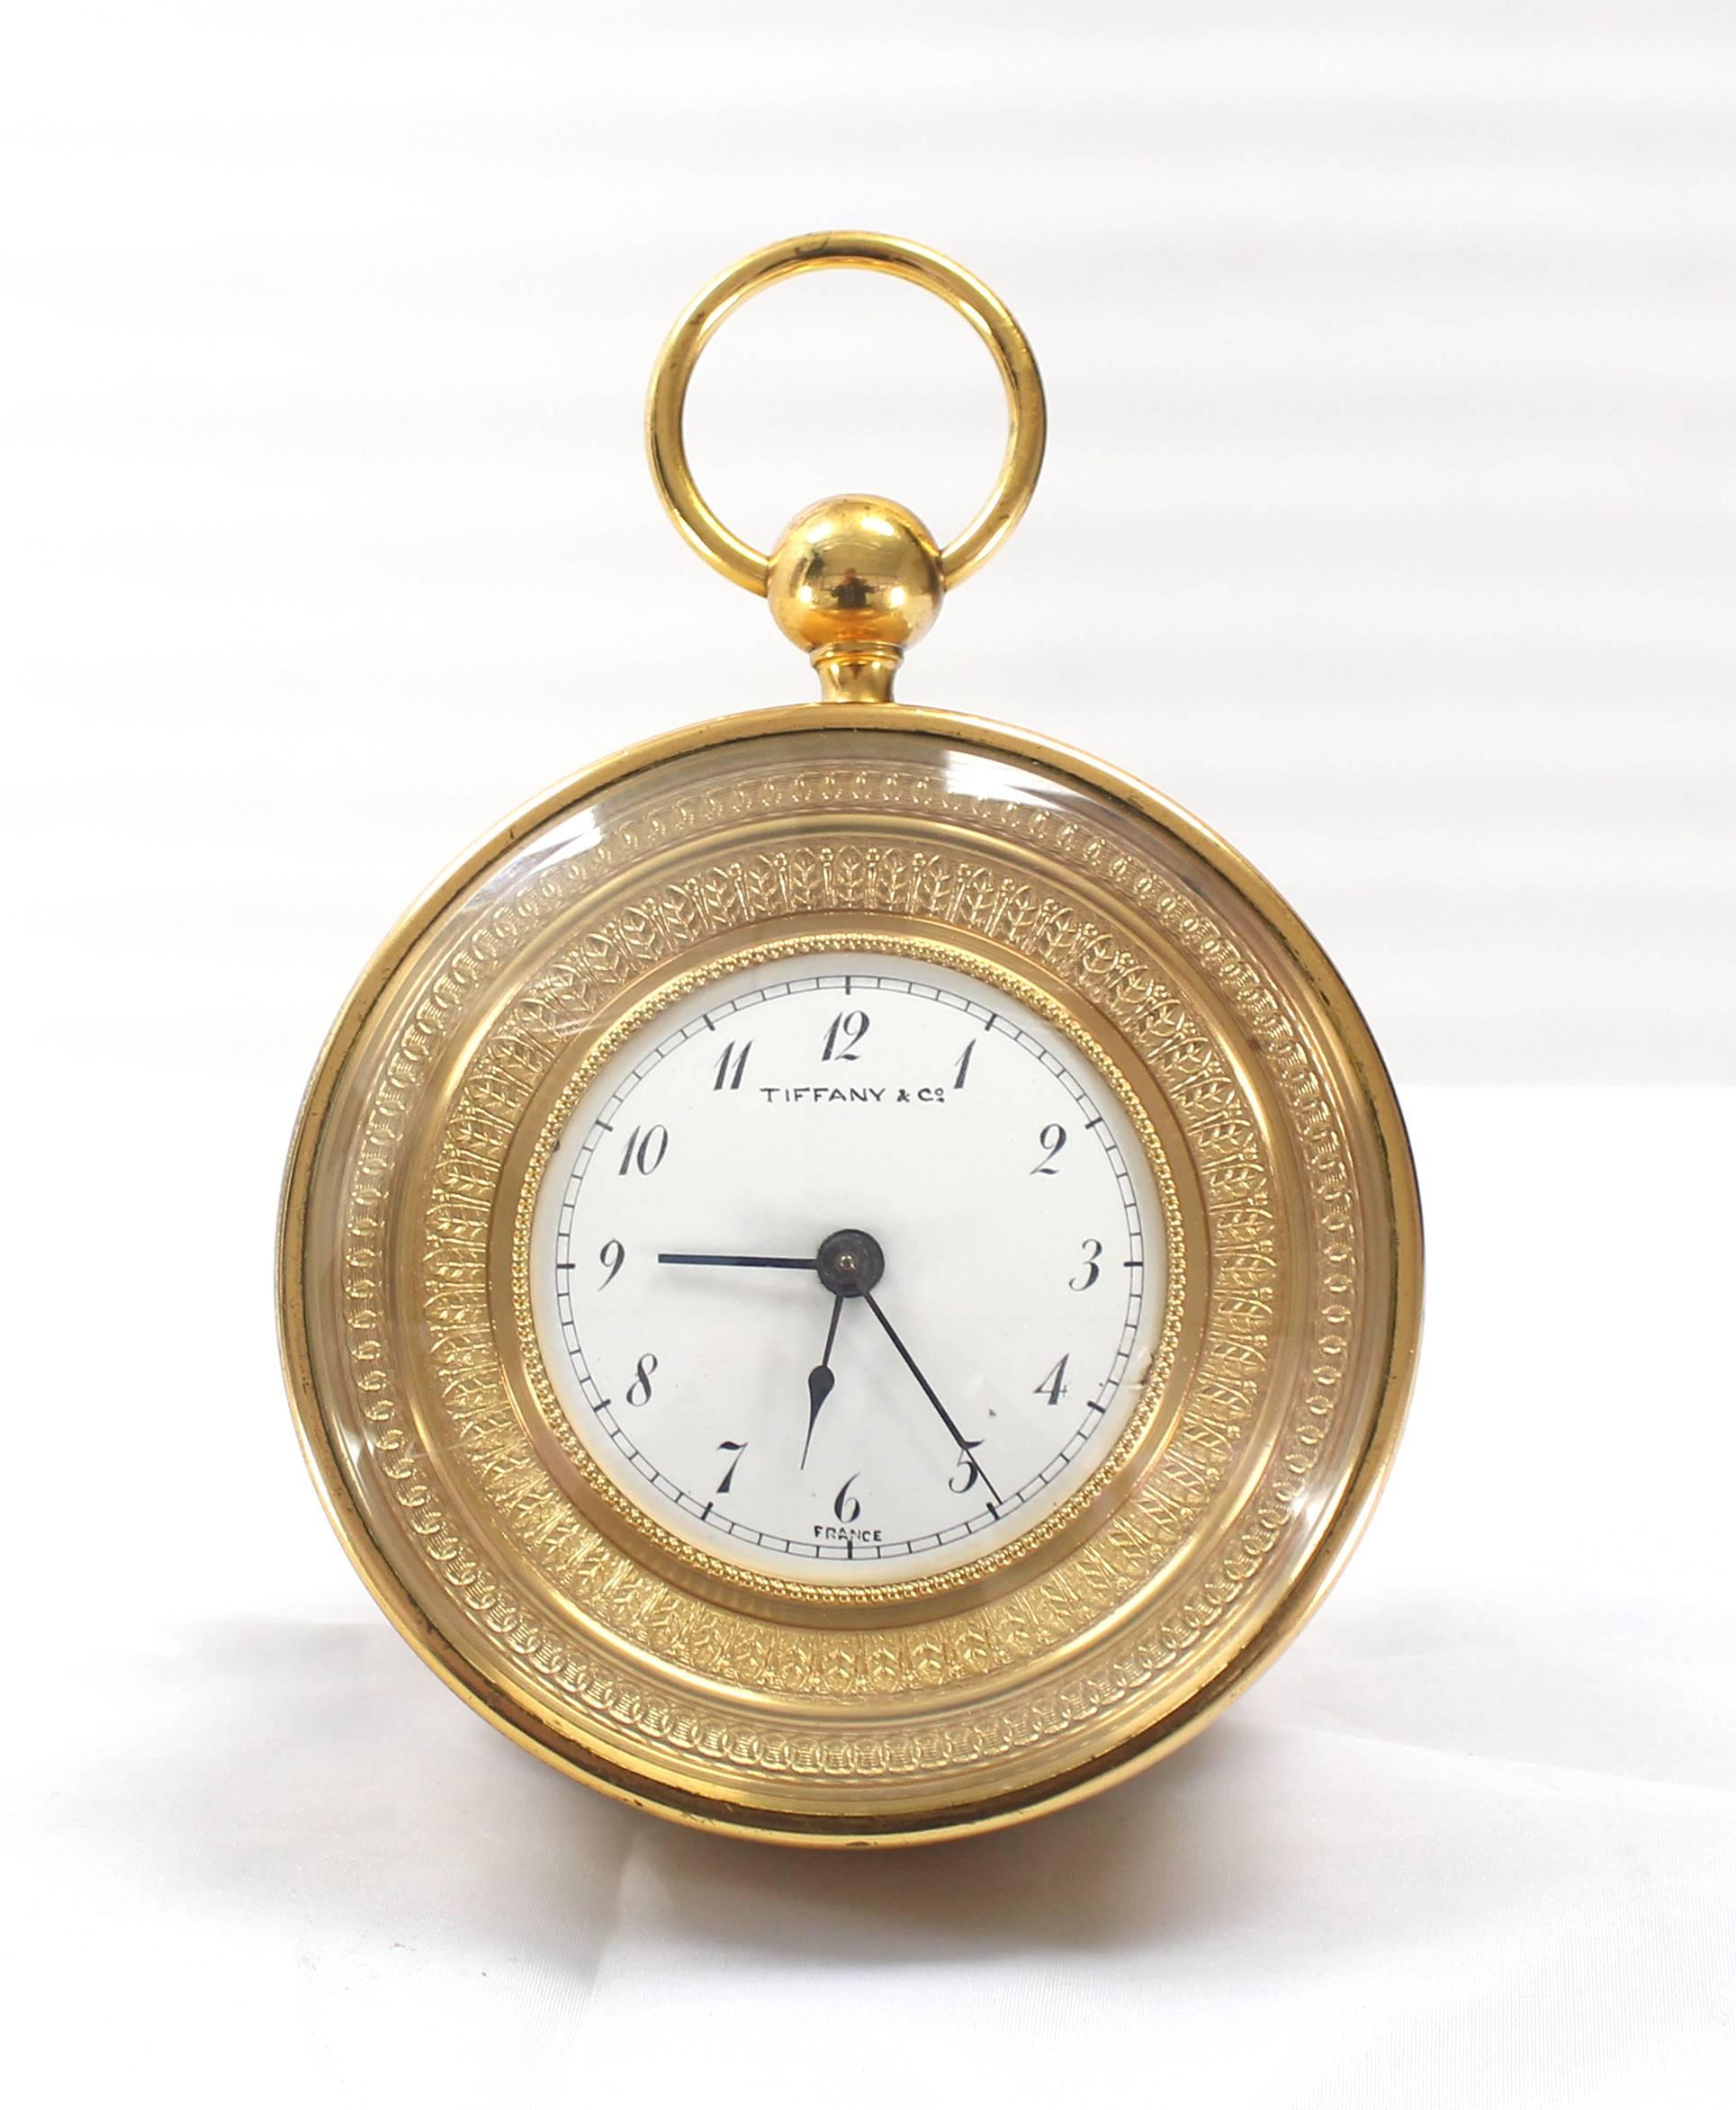 Very nice antique Tiffany bronze travel alarm clock. Clock is in good working condition. One of the original crowns missing. One crown can be shared to adjust time and alarm hands.
 